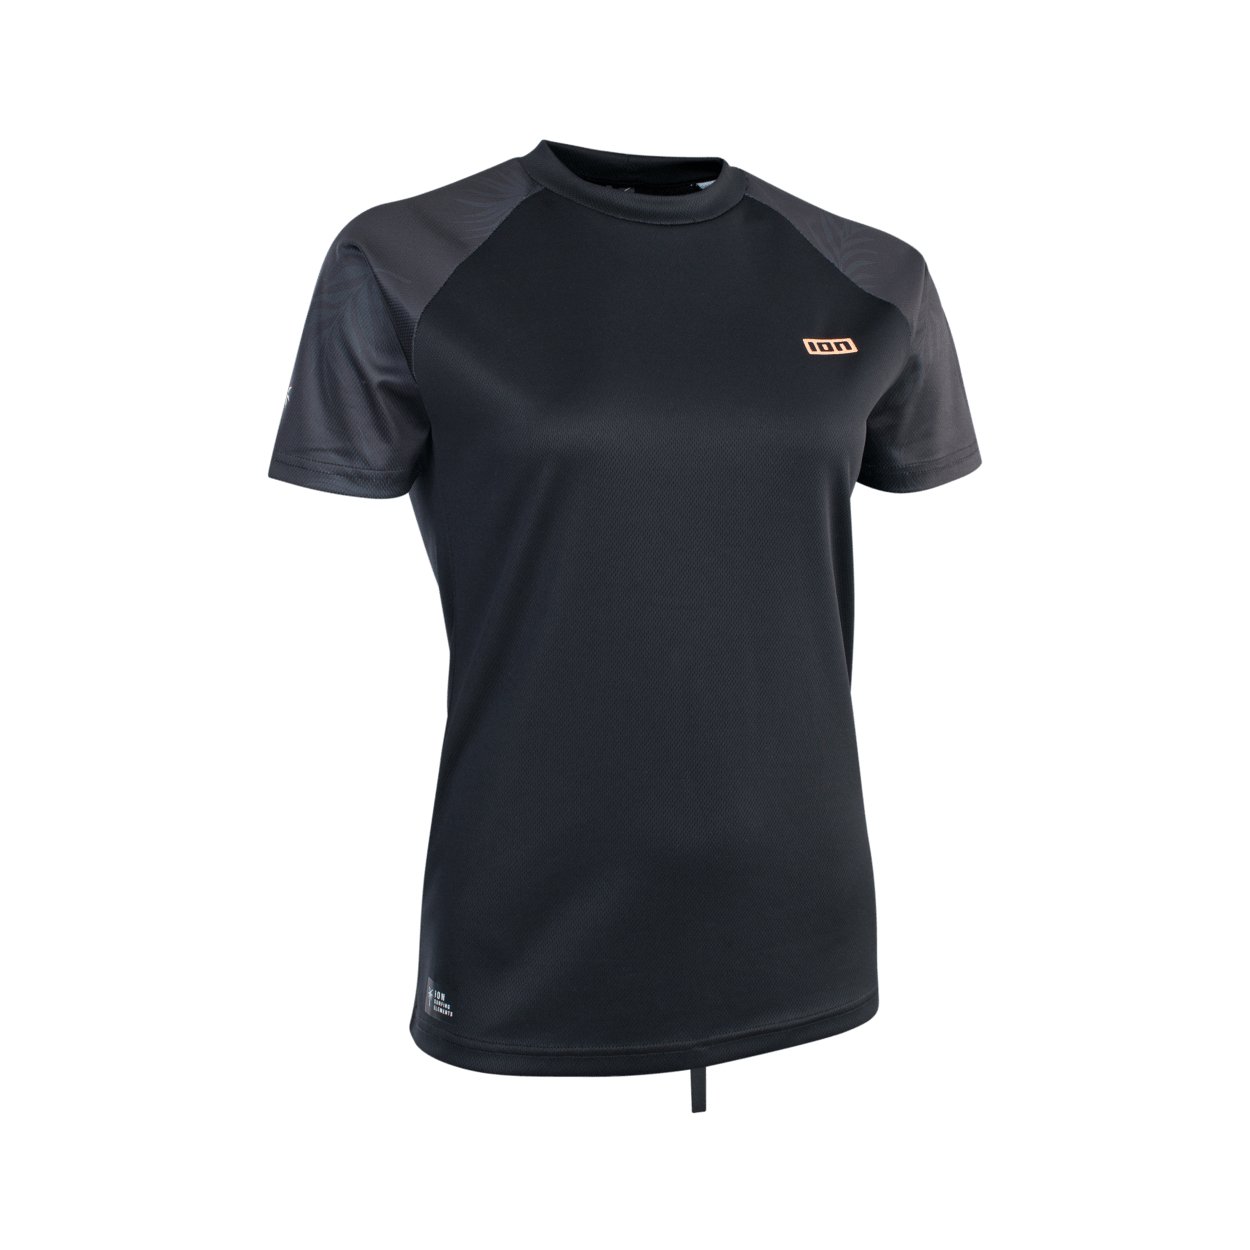 ION Wetshirt SS women 2022 - Worthing Watersports - 9010583051598 - Tops - ION Water